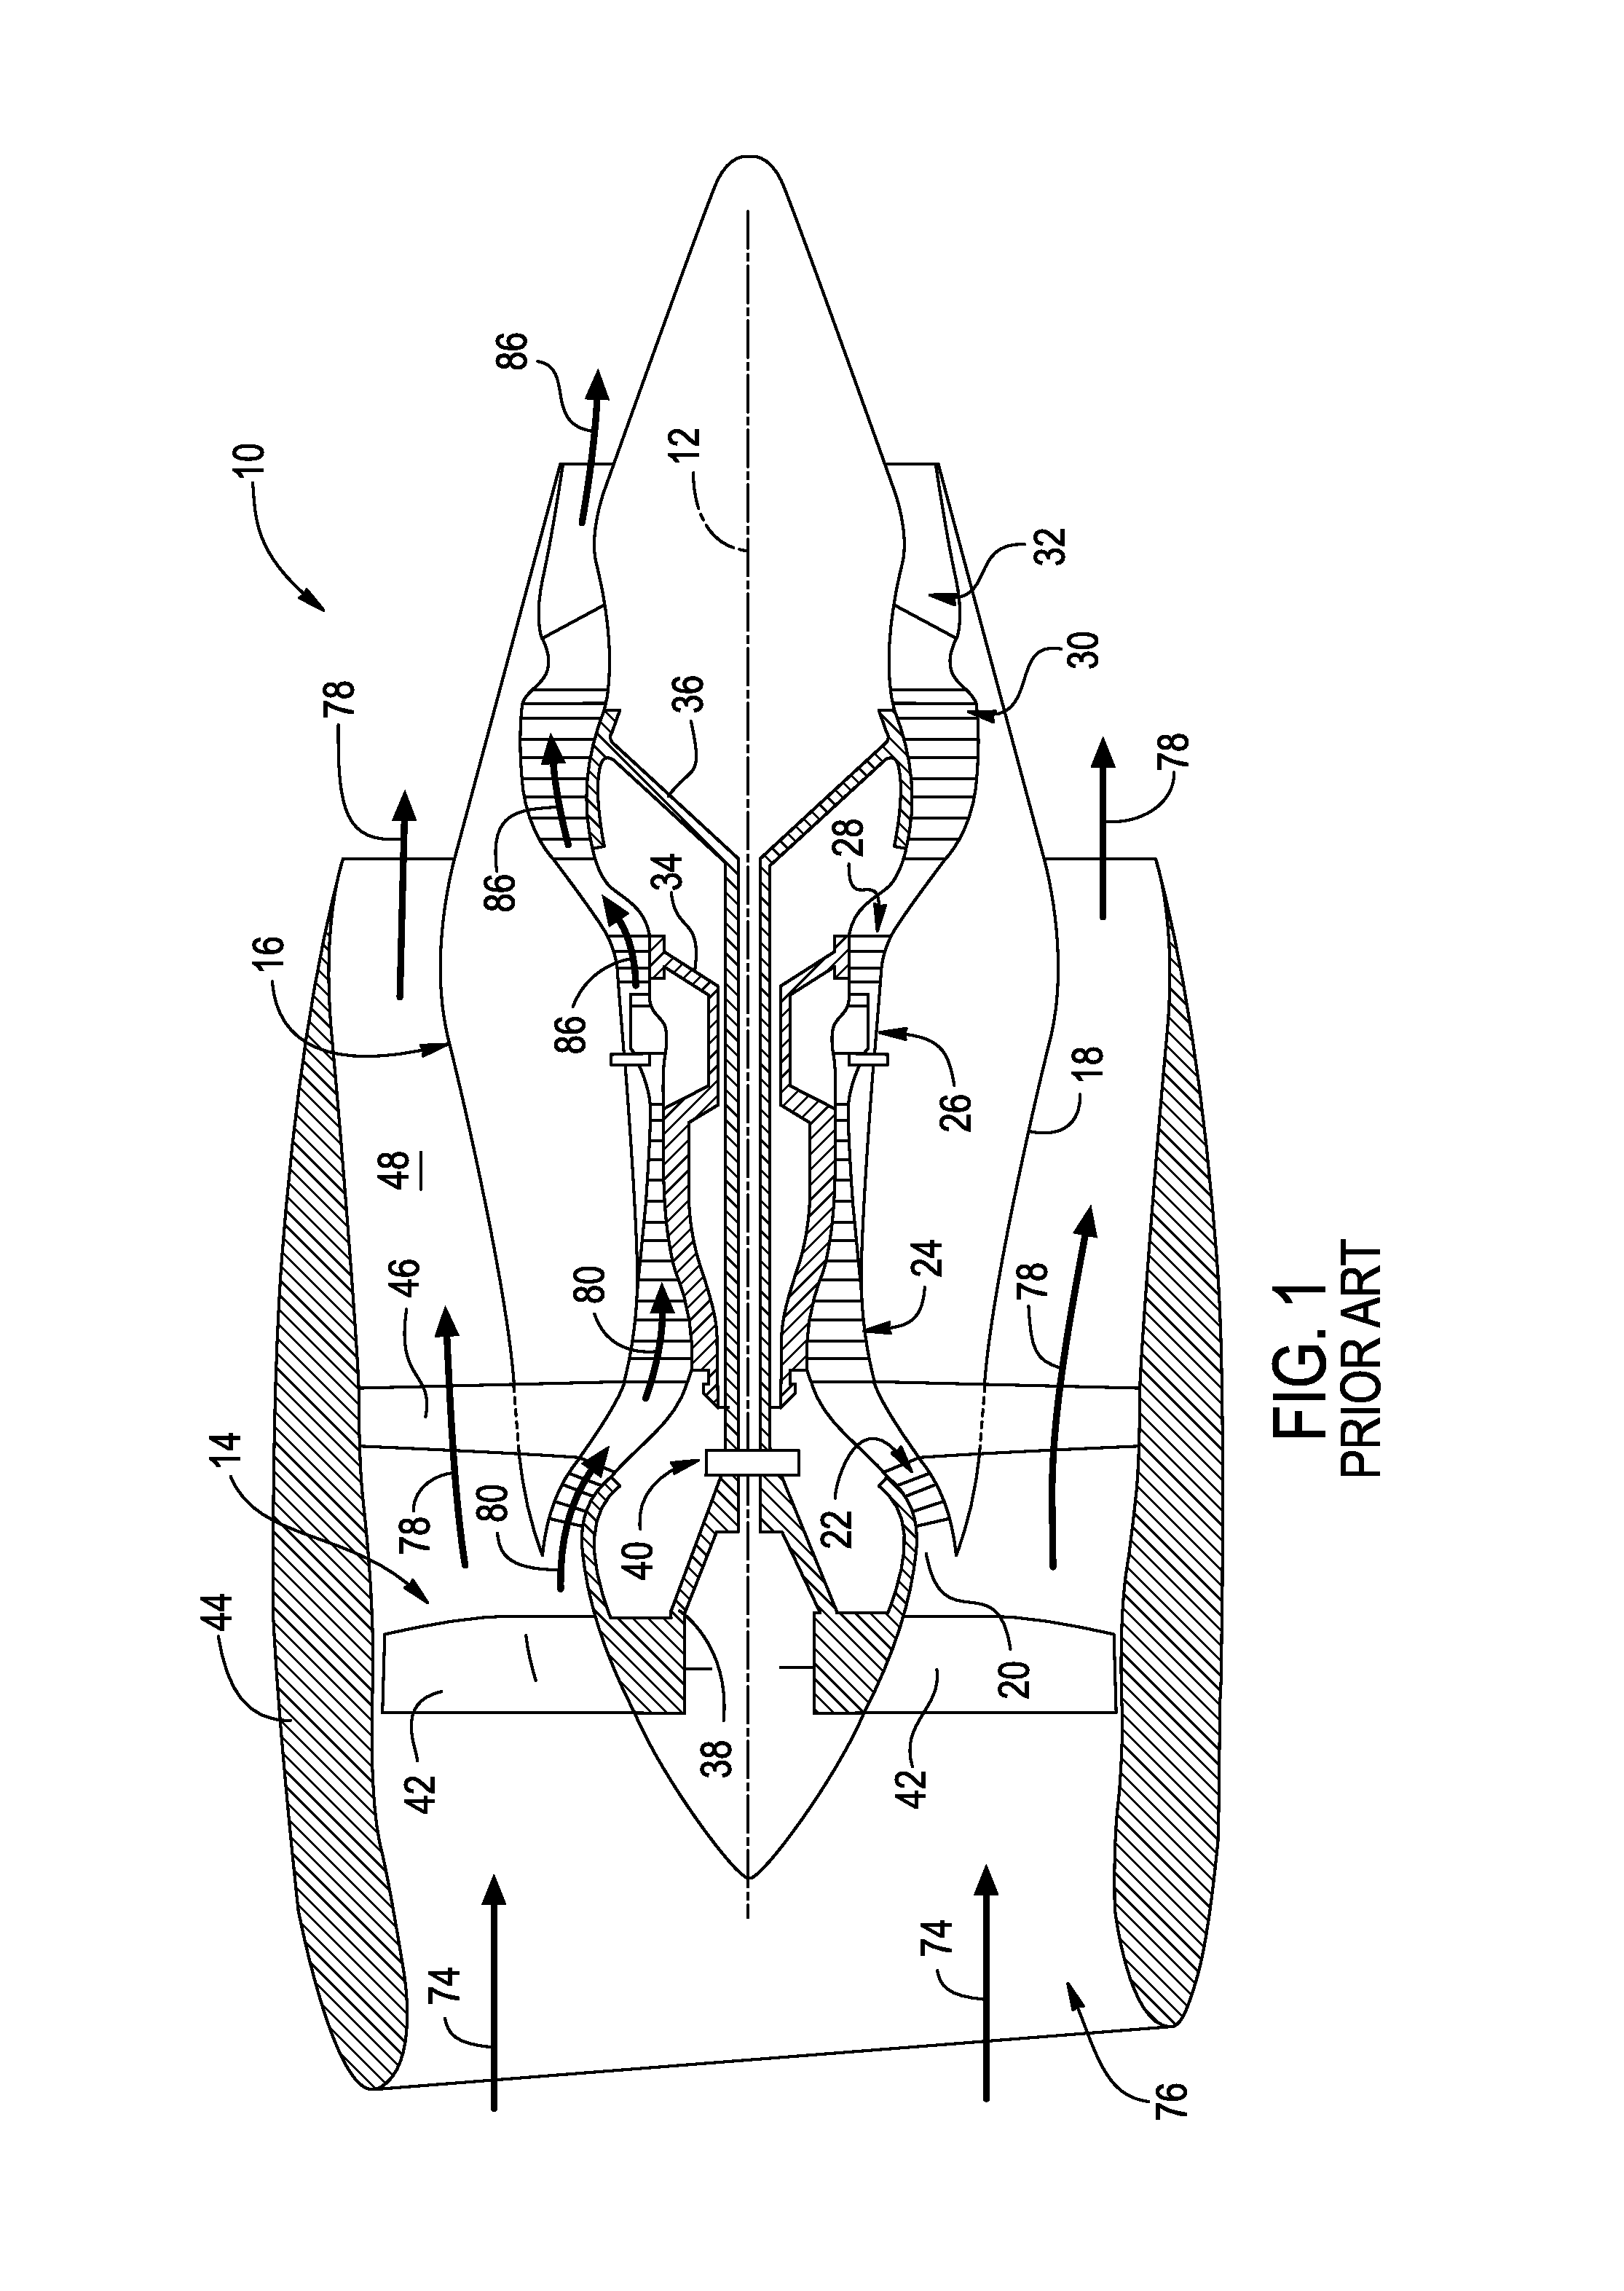 System for suppressing acoustic noise within a gas turbine combustor